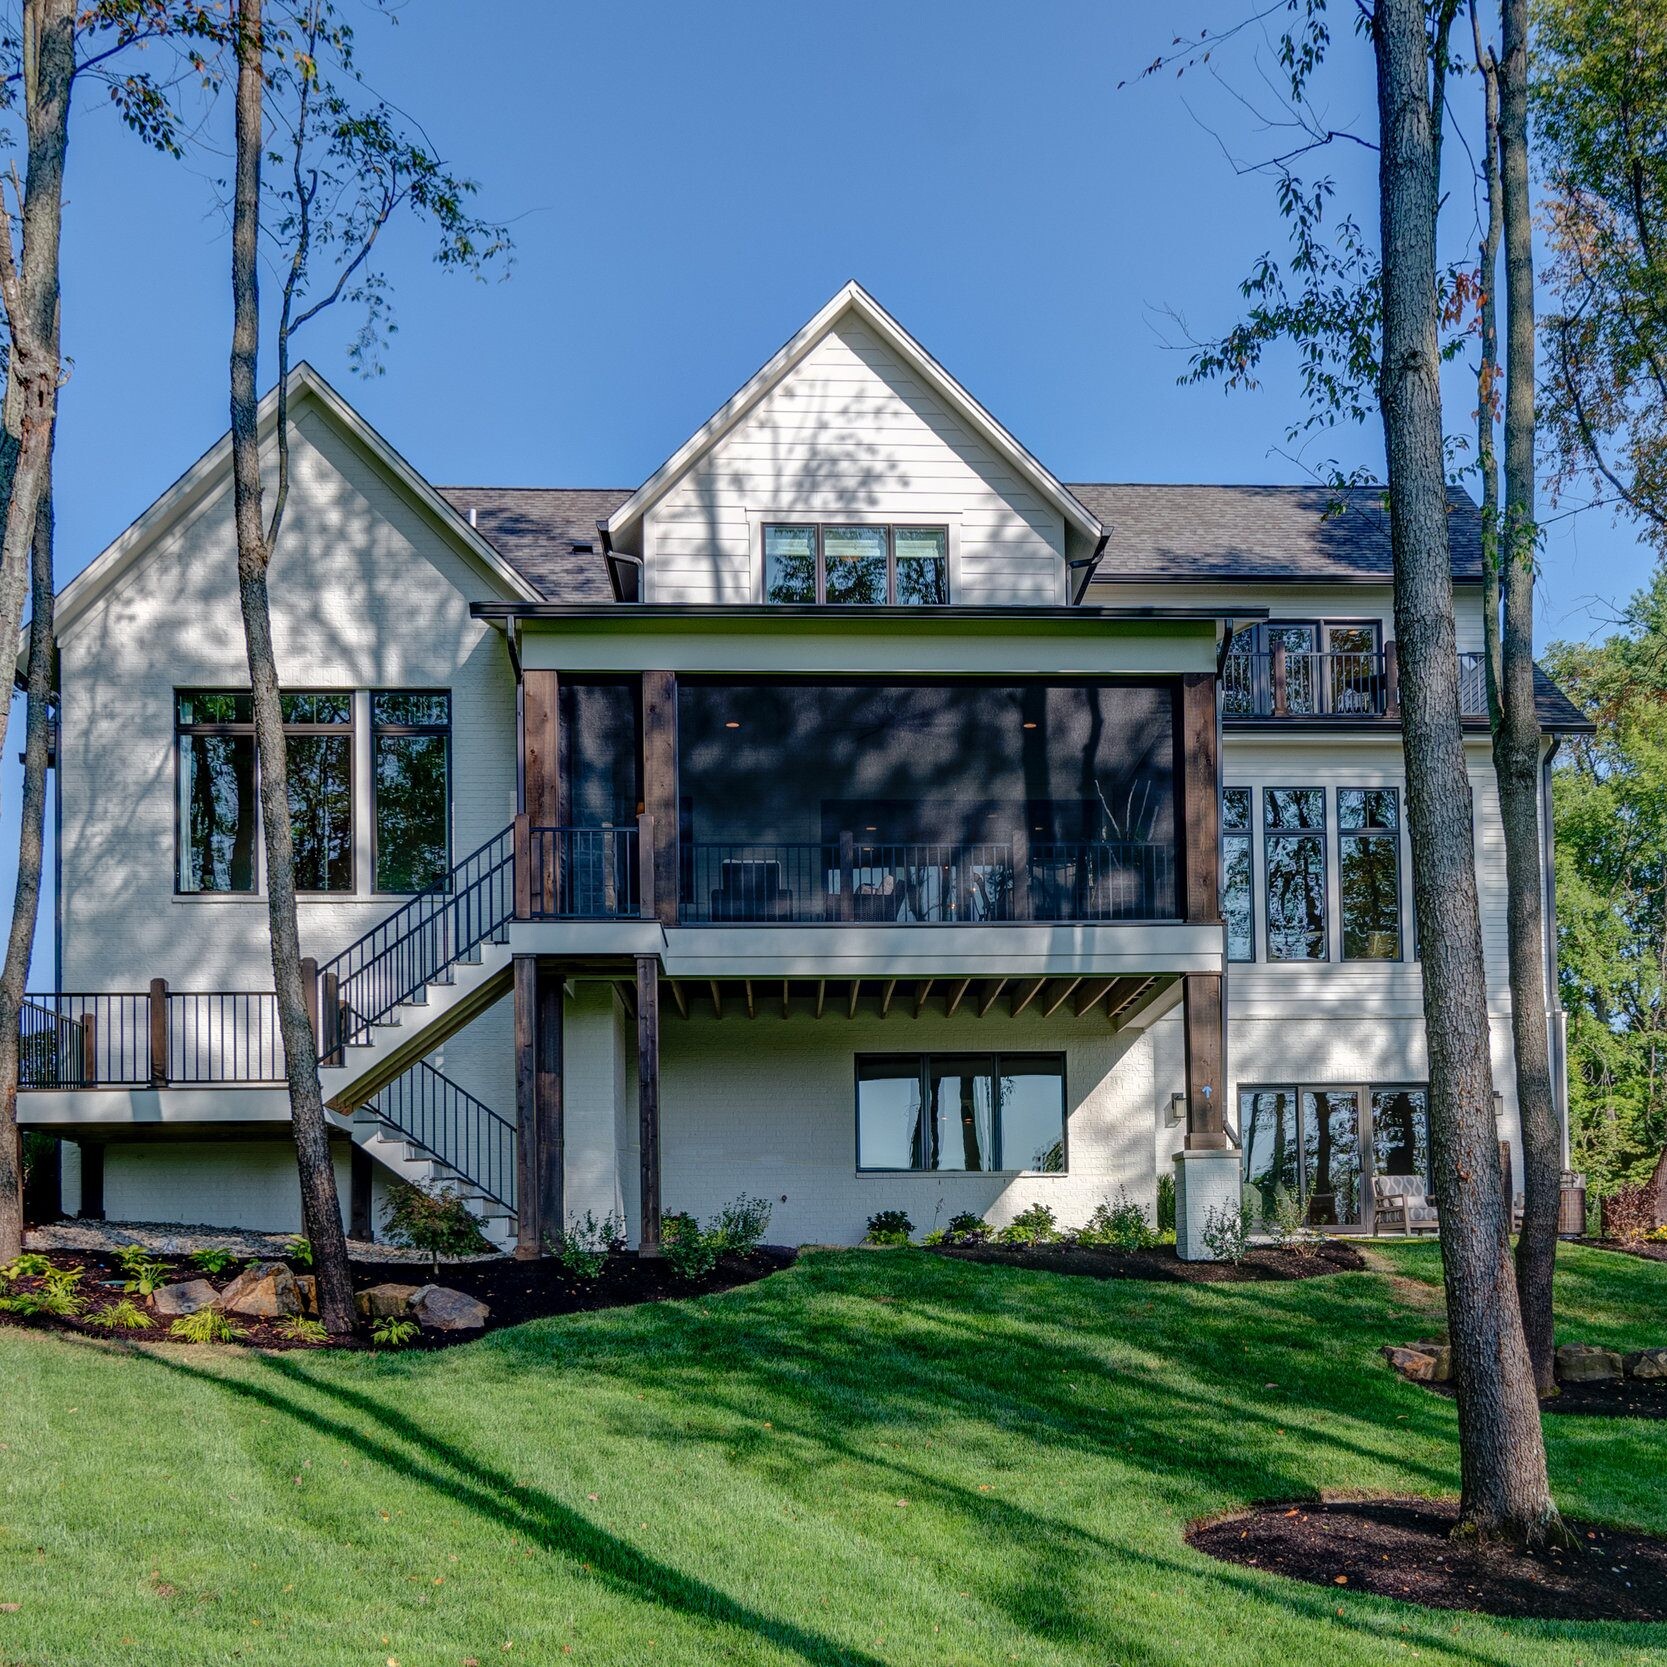 A custom home for sale in Westfield, Indiana with a large deck surrounded by beautiful trees.